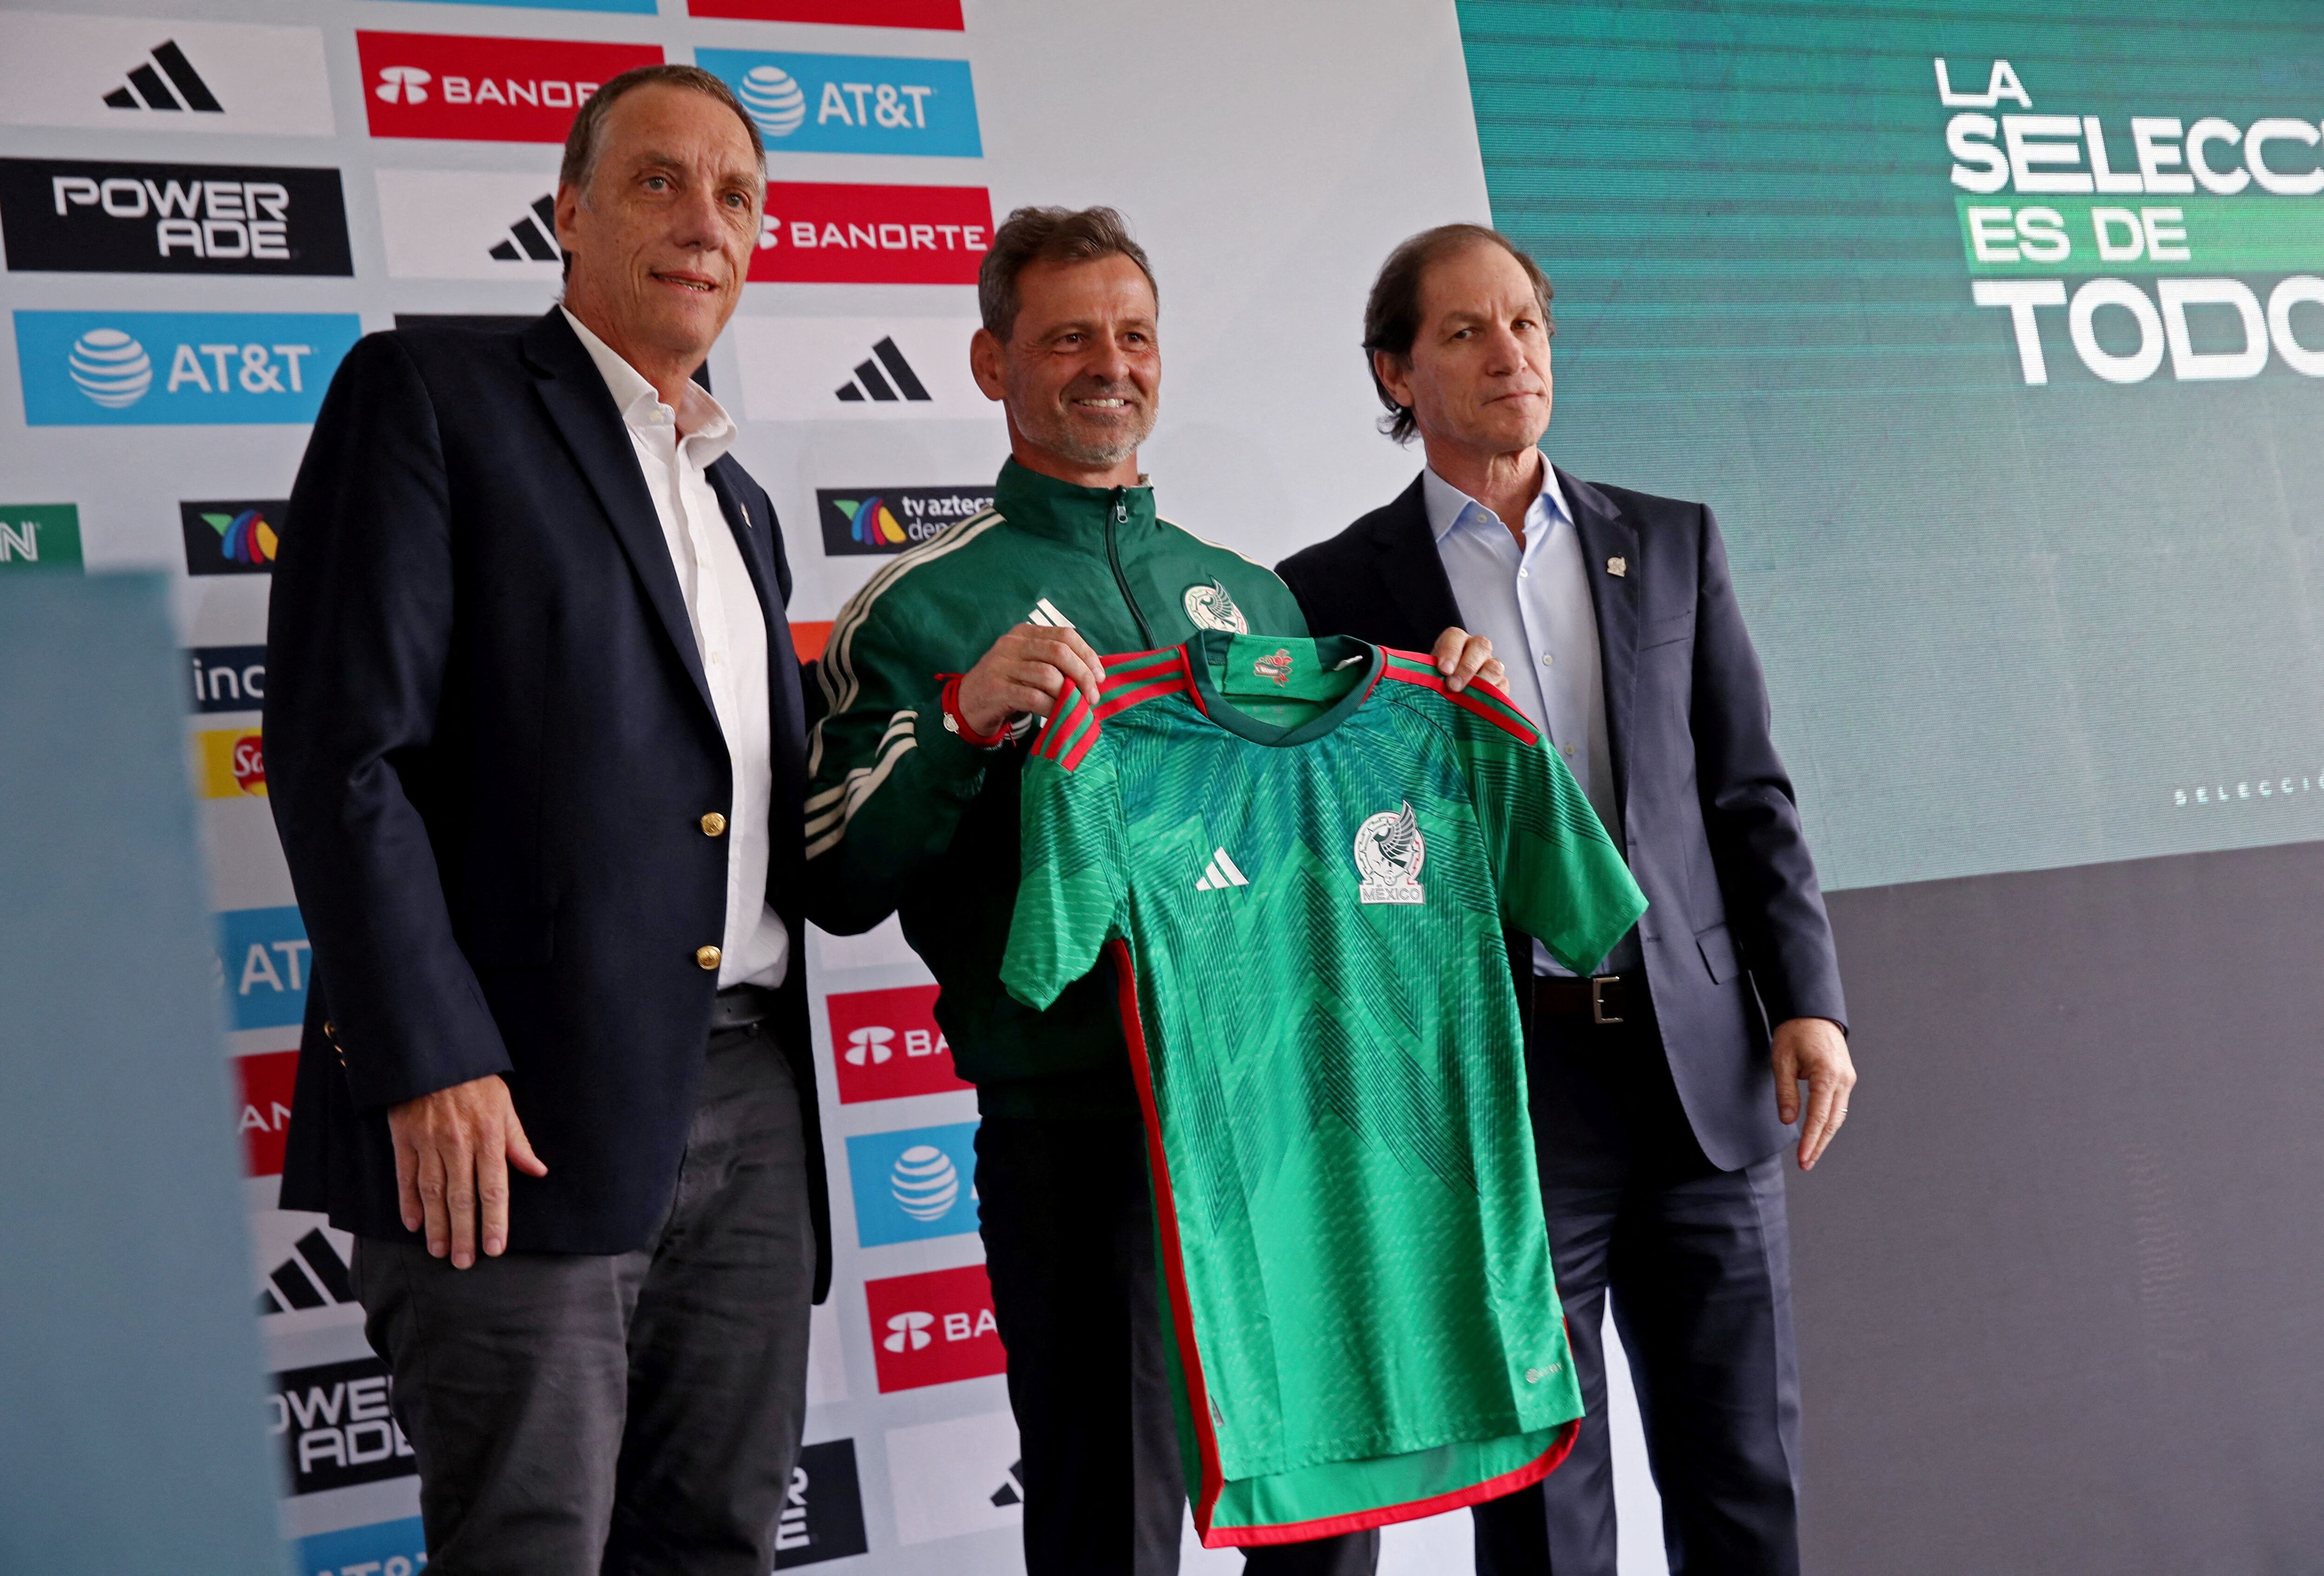 FILE PHOTO: Soccer Football - Diego Cocca being presented as Mexico coach - Centro de Alto Rendimiento, Mexico City, Mexico - February 10, 2023 Diego Cocca poses with Mexico jersey during press conference with Sports director Jaime Ordiales and Rodrigo Ares de Parga director of national teams REUTERS/Henry Romero/File Photo